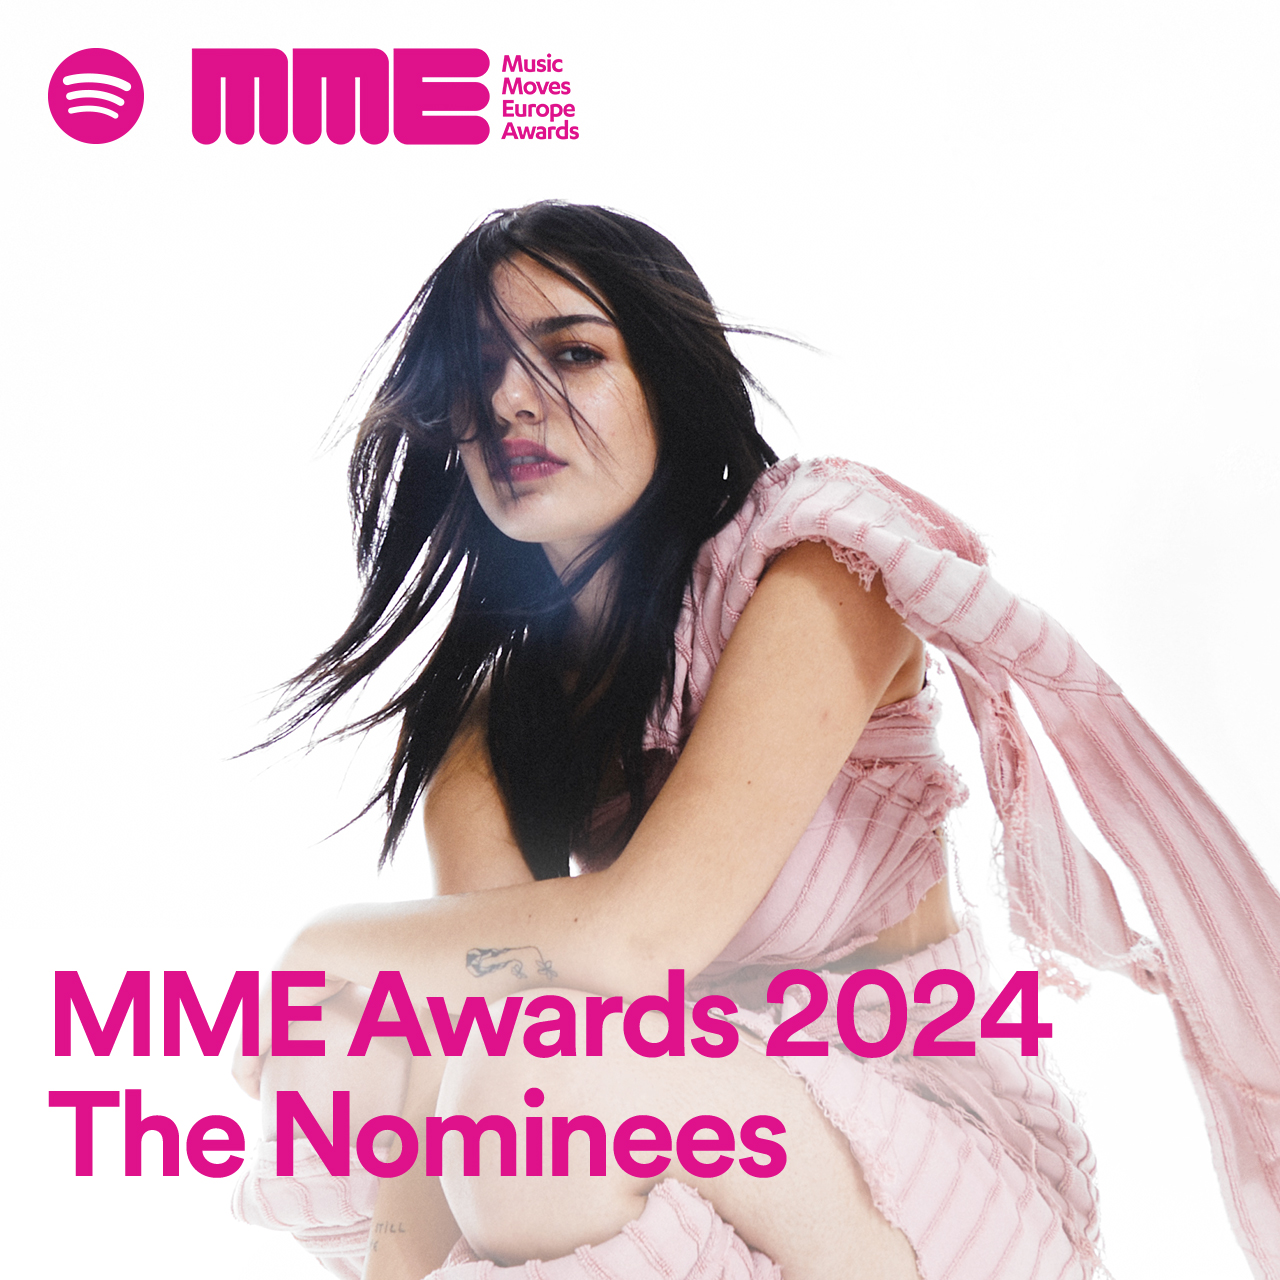 an image of yune pinki with graphic treatment over it noting the MME Awards 2024